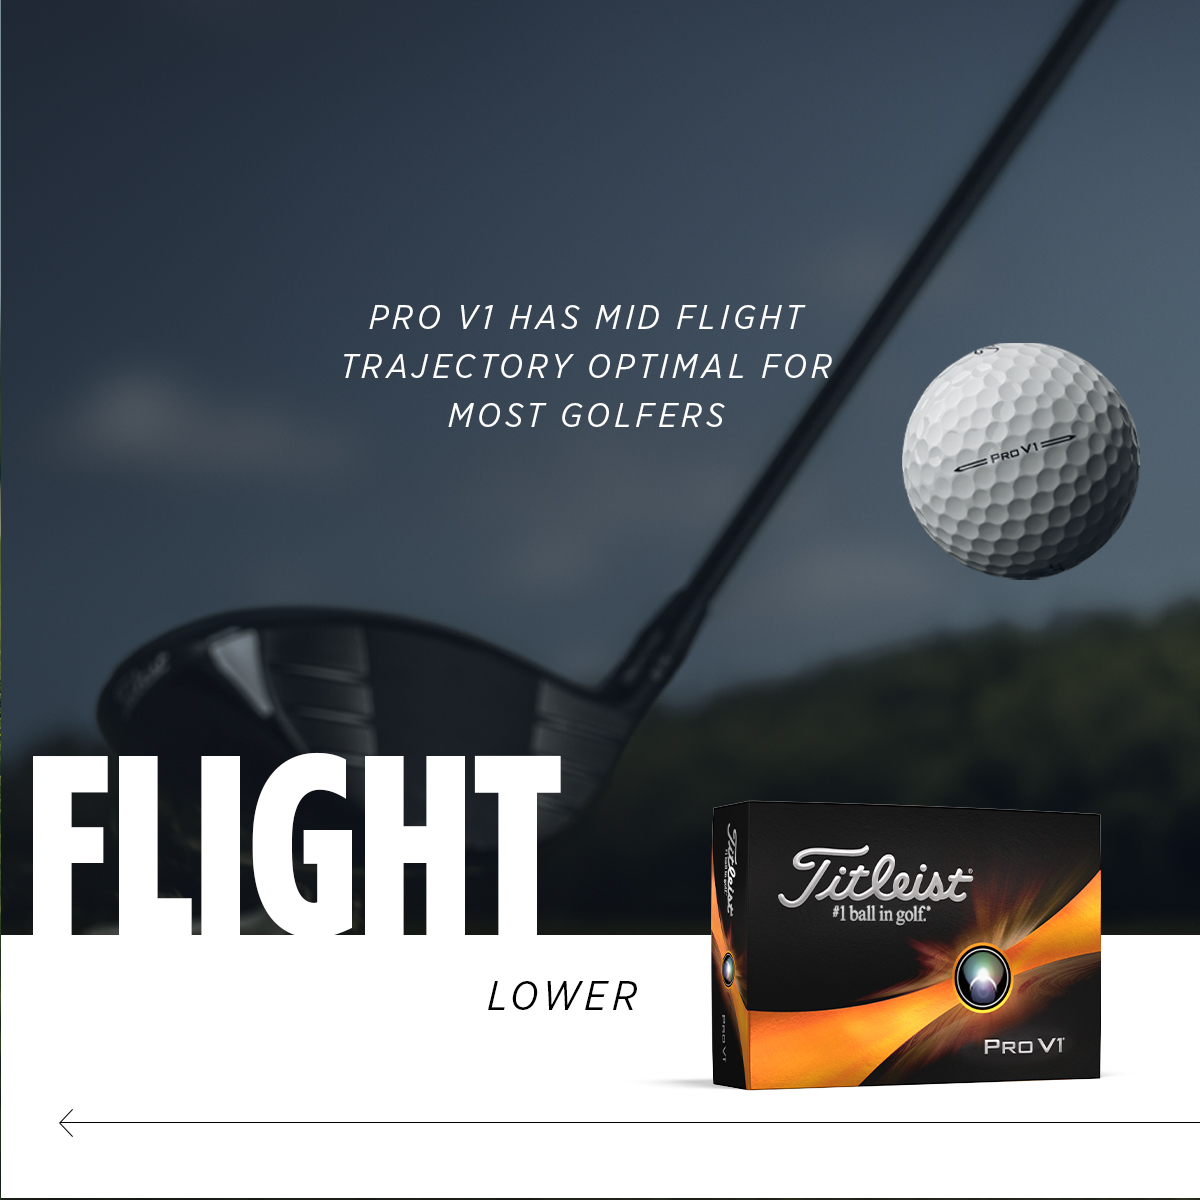  Pro V1 has mid flight trajectory optimal for most golfers